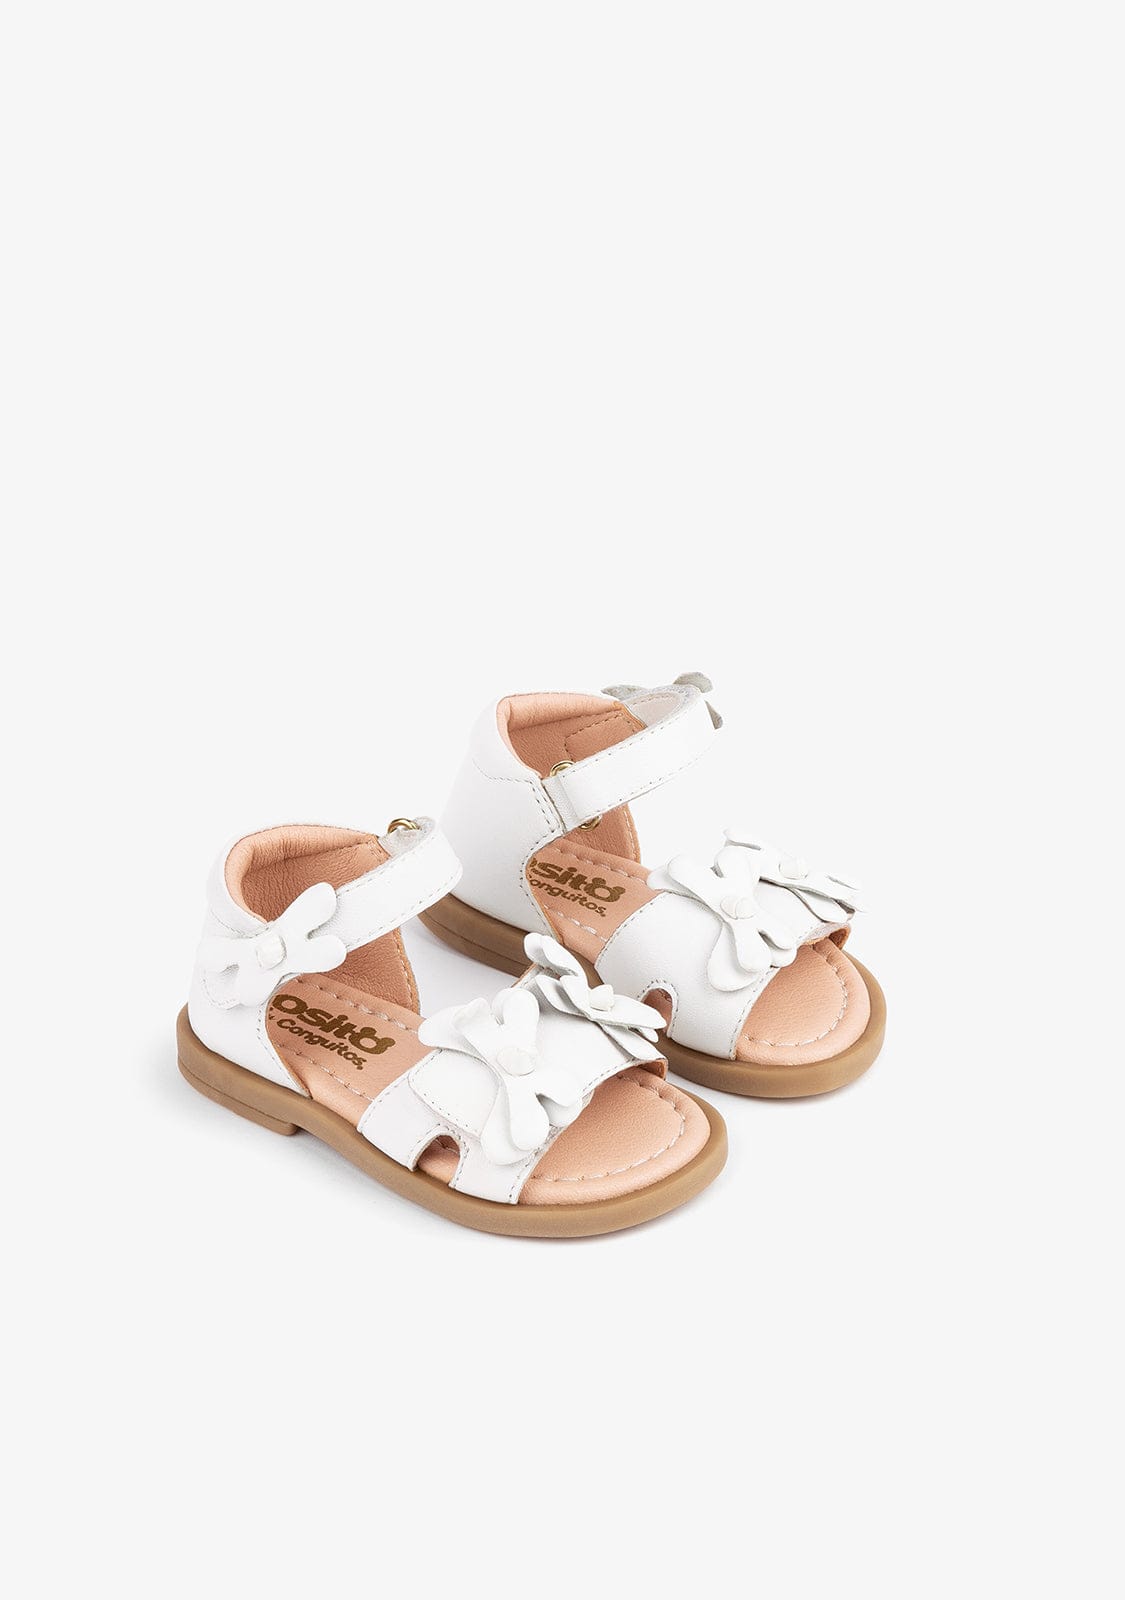 OSITO Shoes Baby's White Flowers Sandals Leather